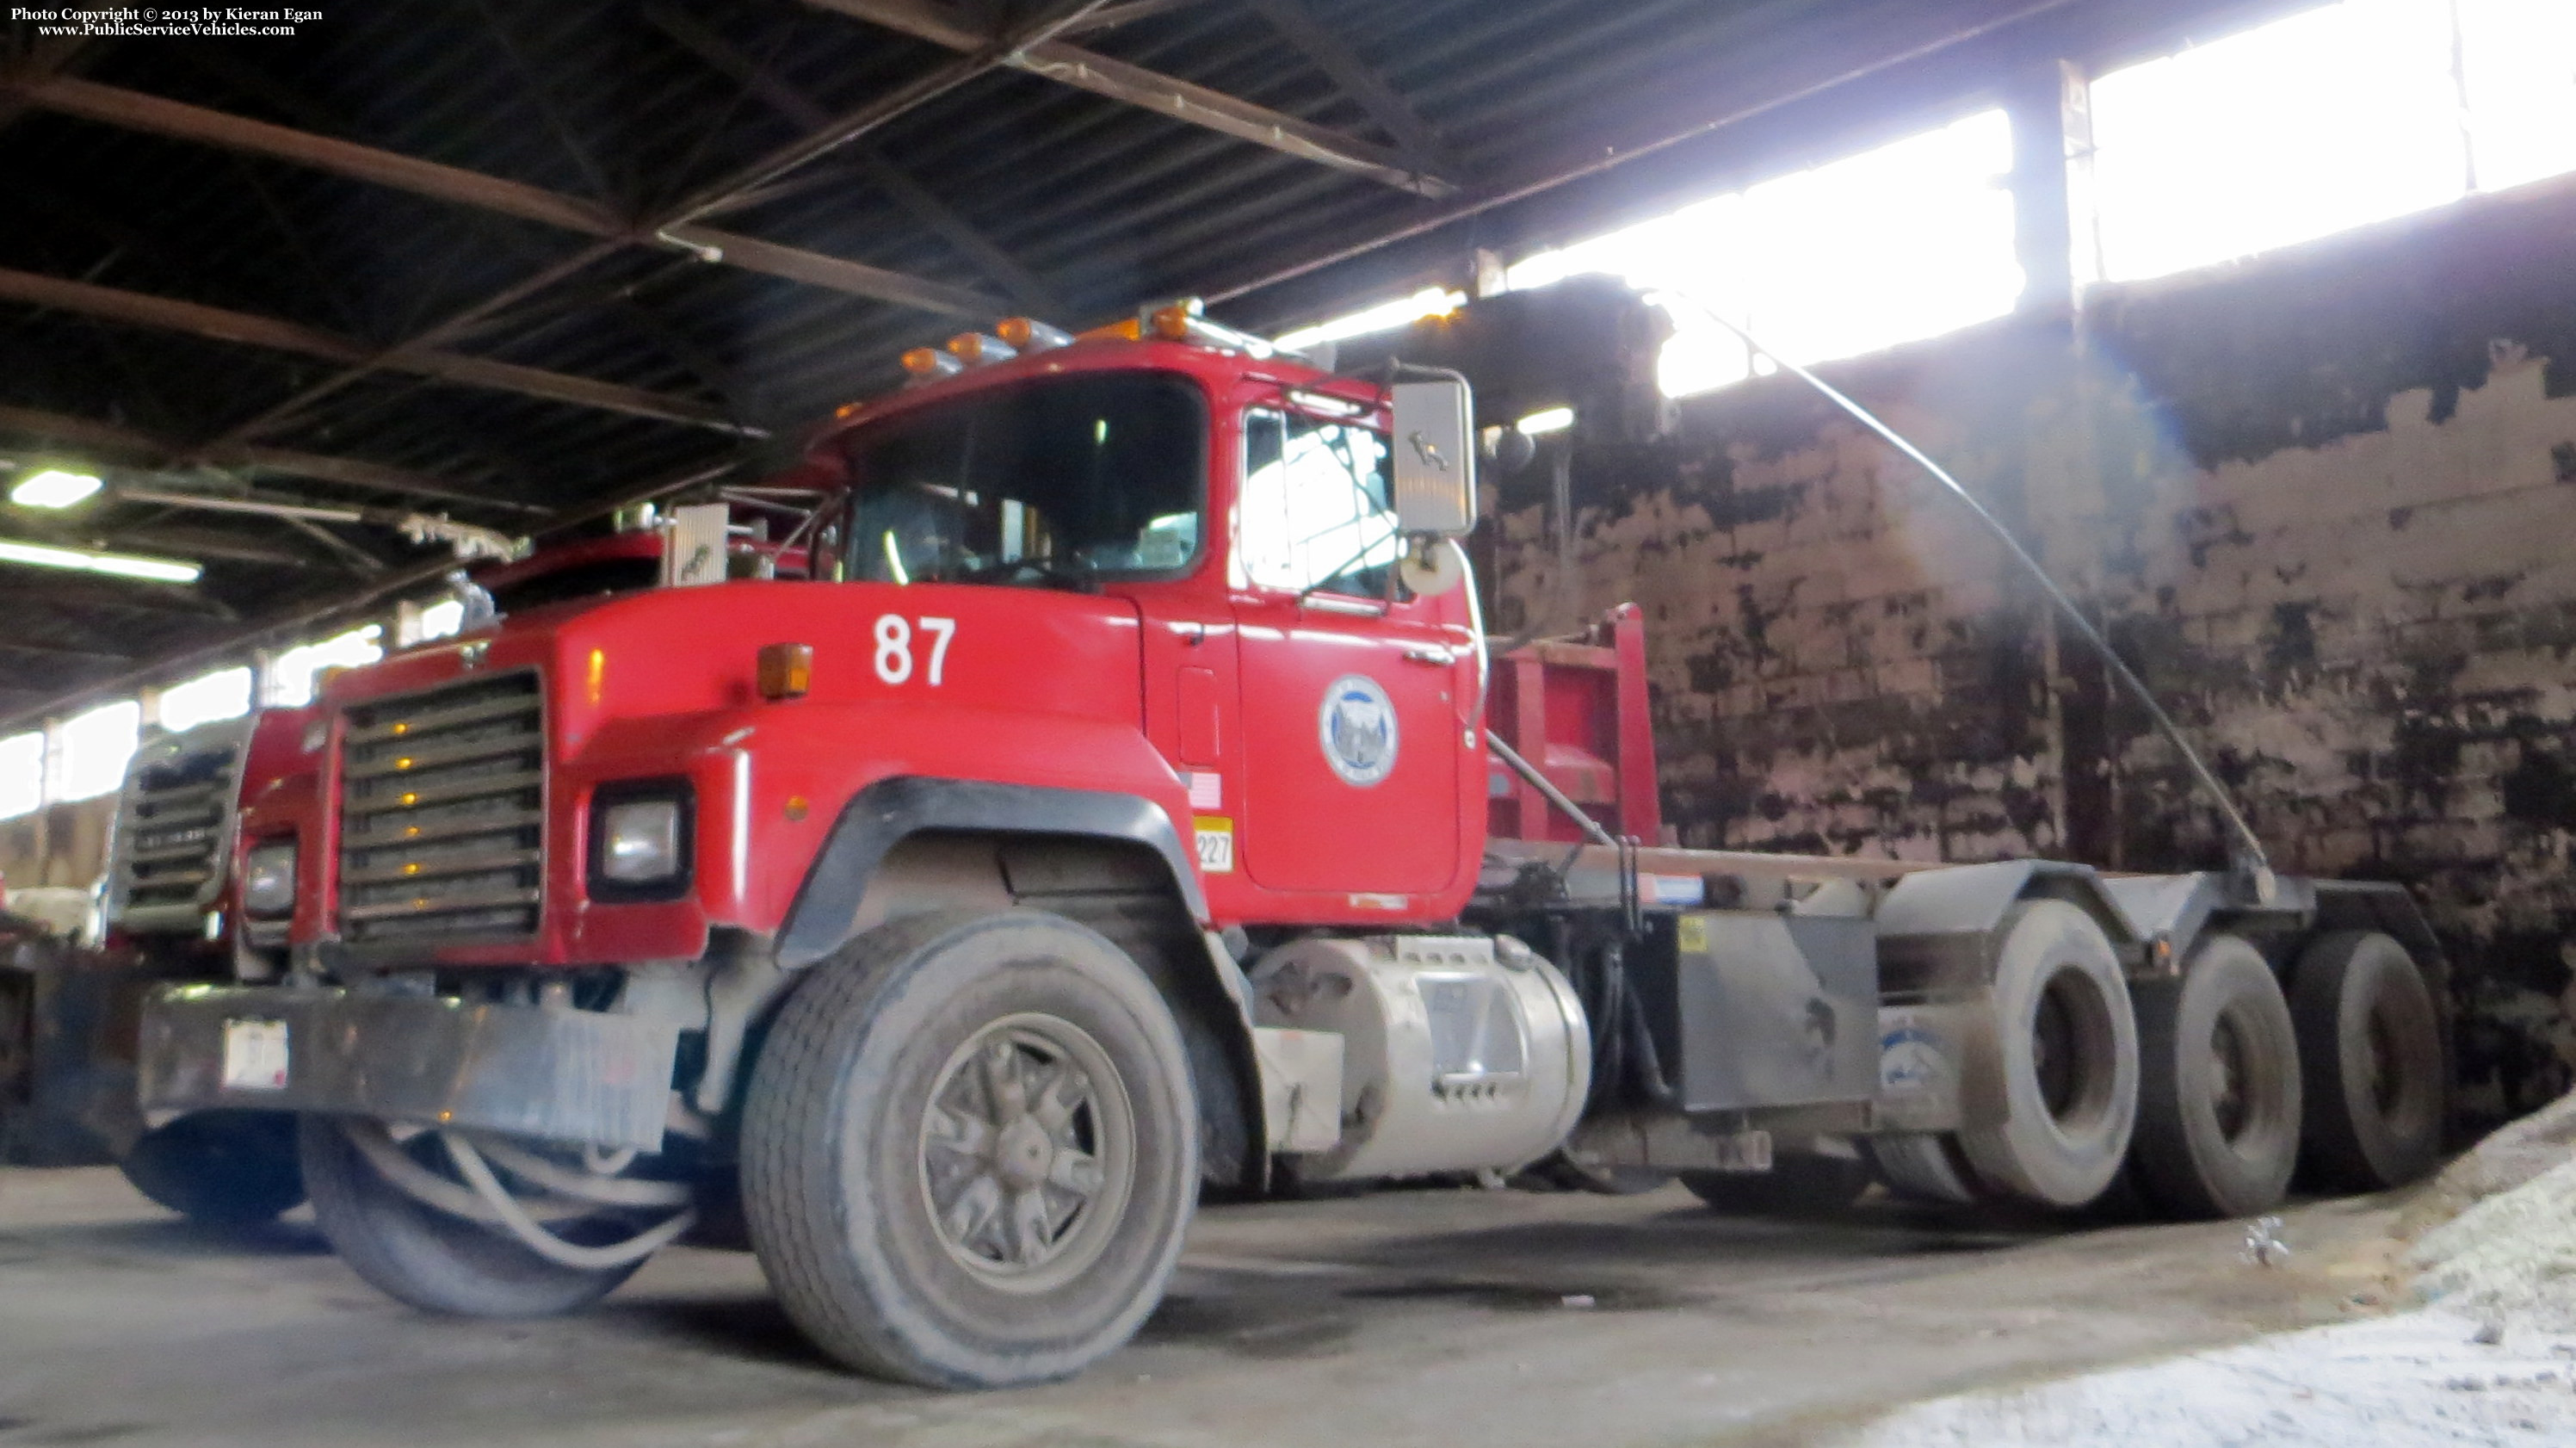 A photo  of Providence Highway Division
            Truck 87, a 1980-2010 Mack             taken by Kieran Egan